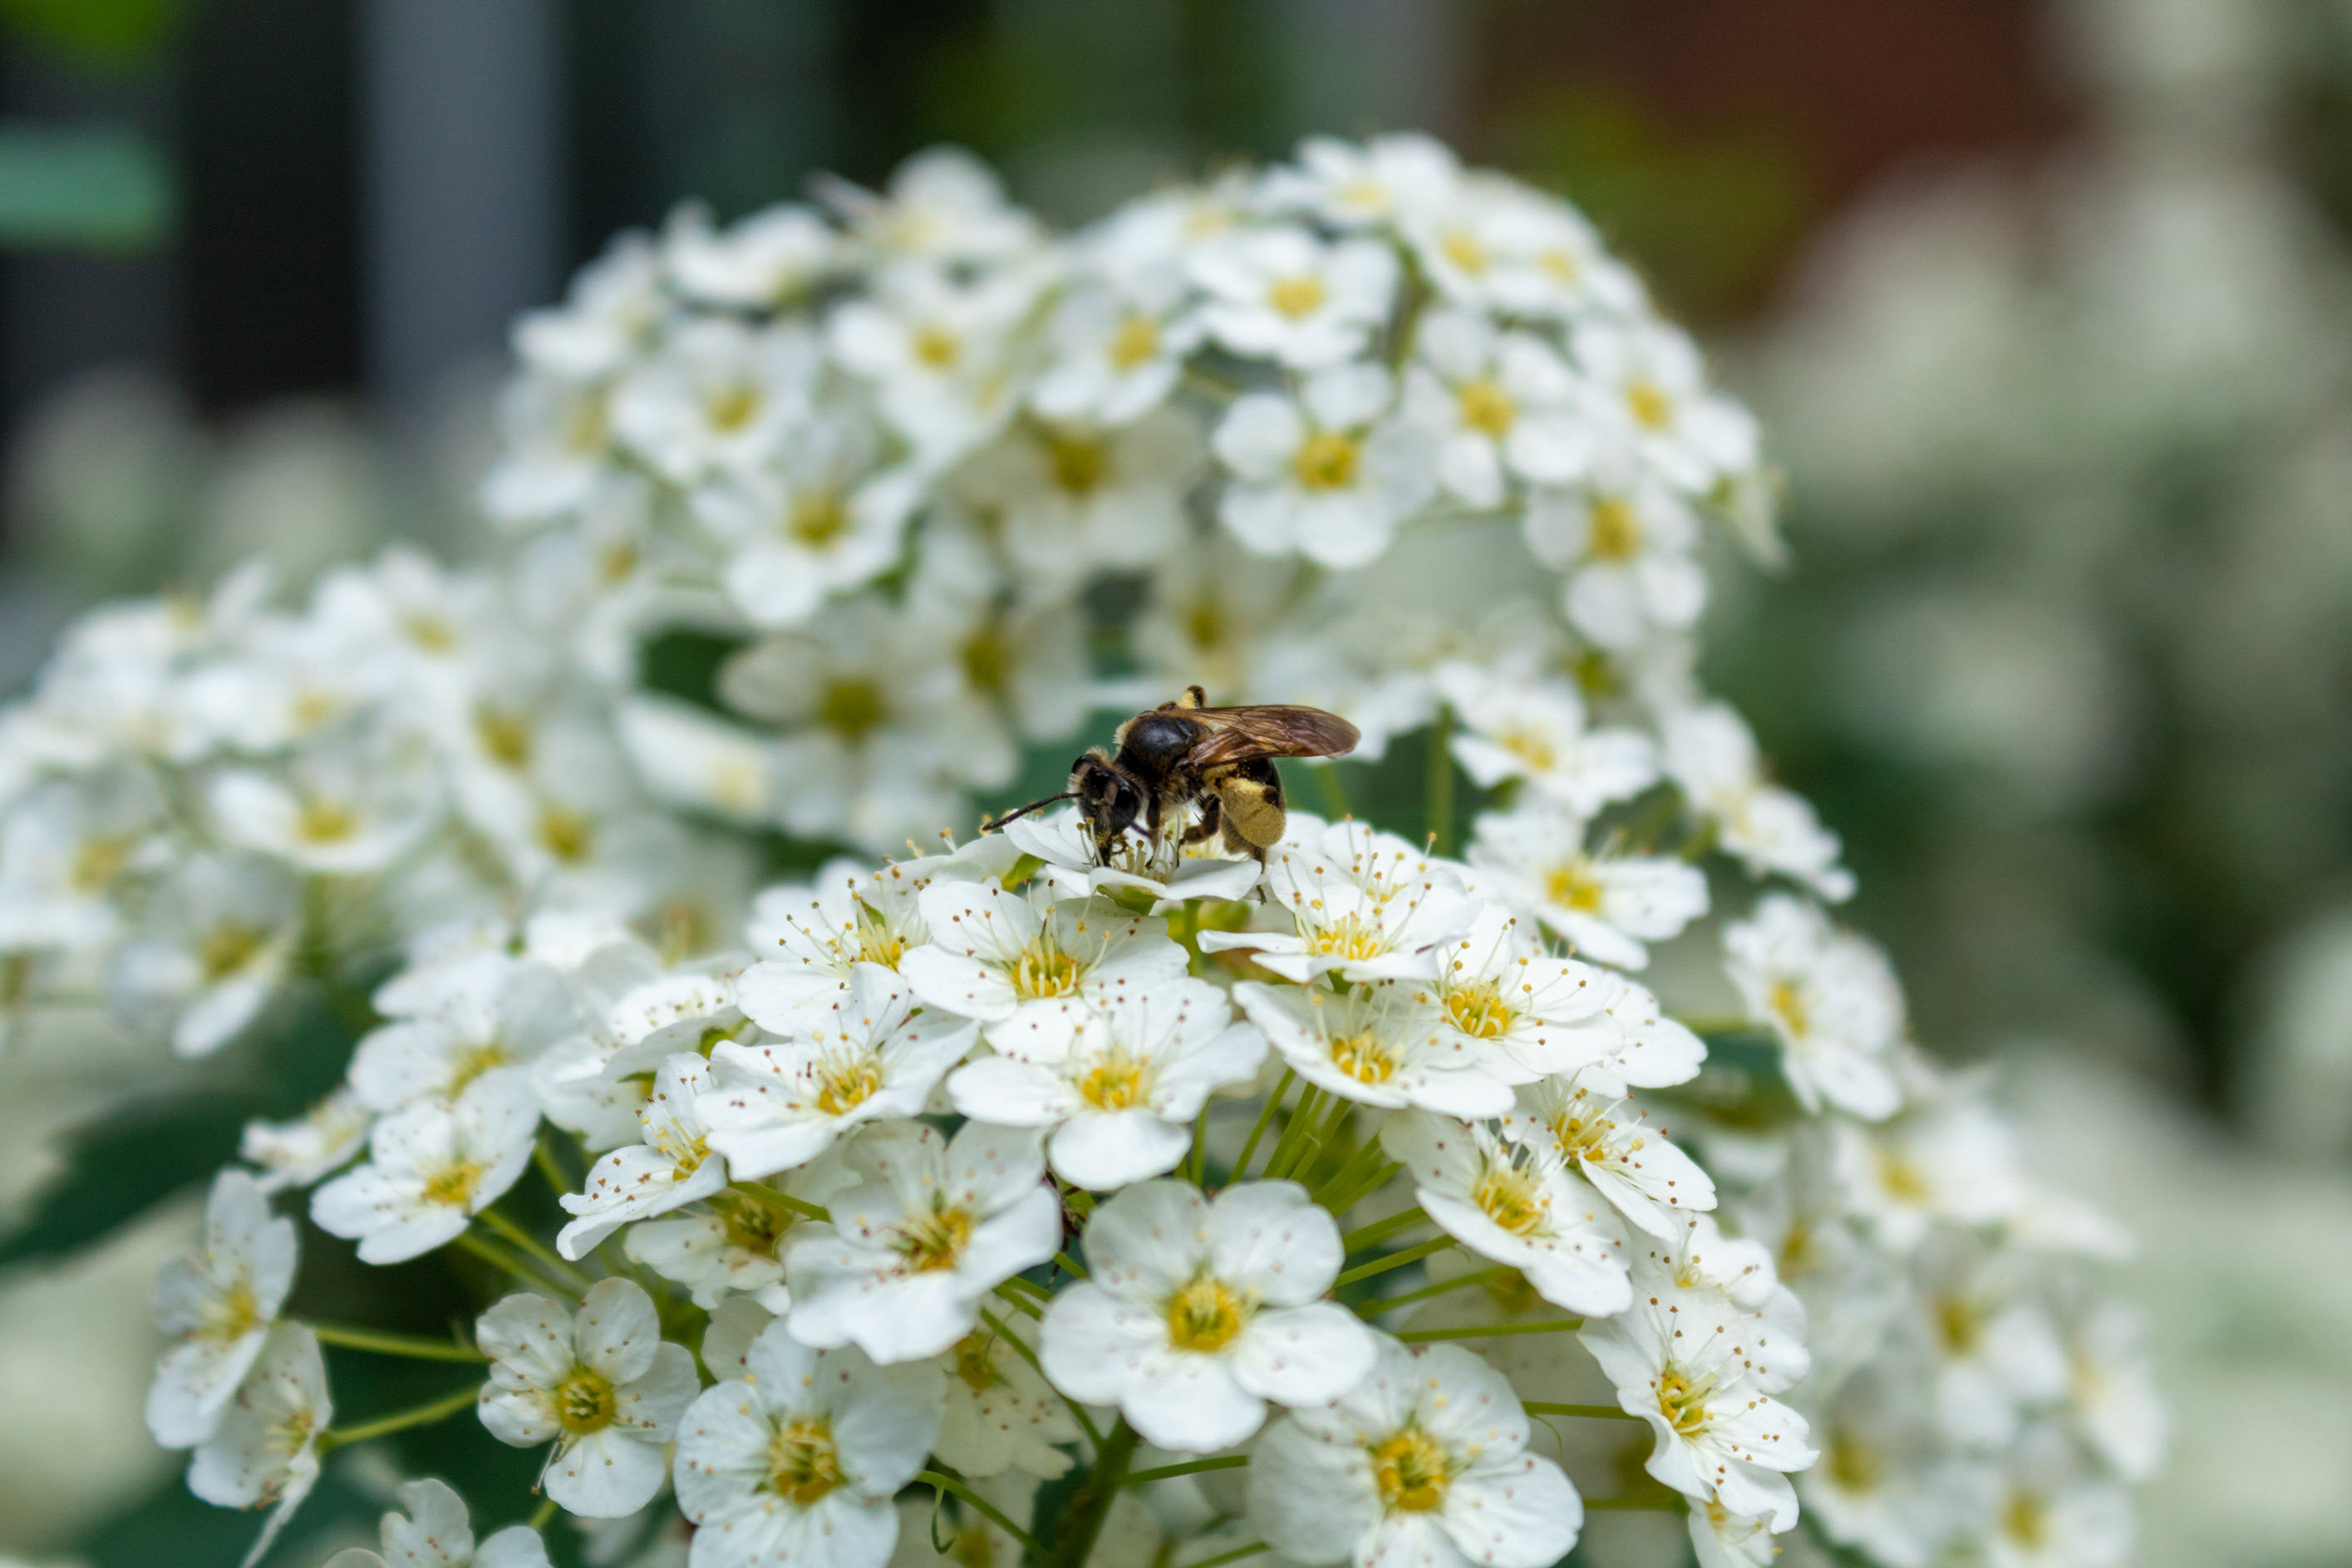 Bee sitting on a bundle of white flowers